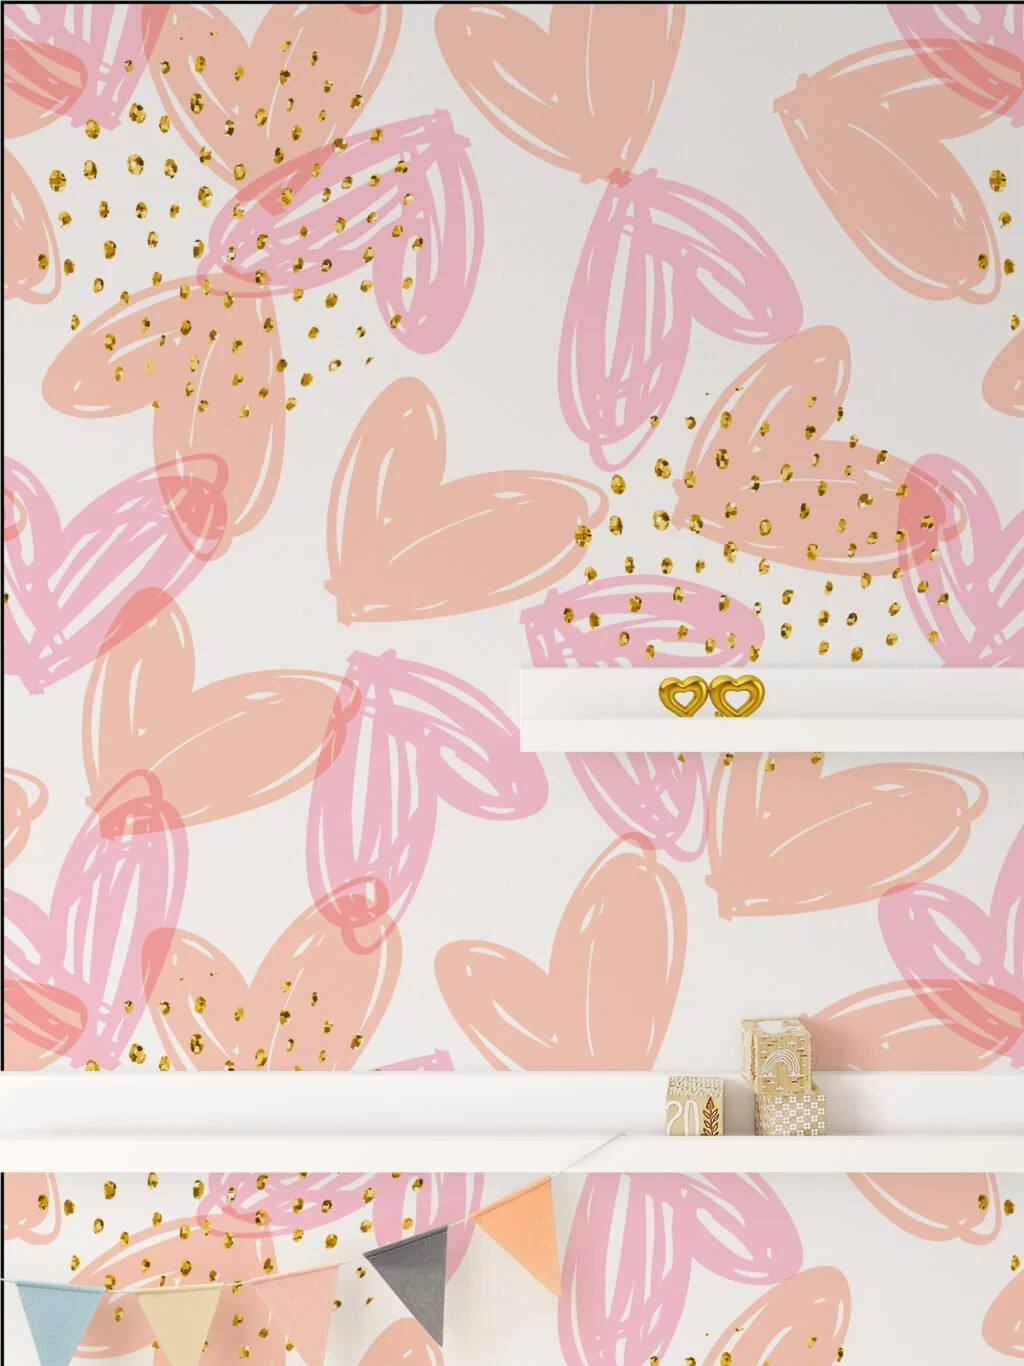 Pastel Peach Pink Hearts Drawing Illustration Wallpaper, Speckled Modern Design Peel & Stick Wall Mural